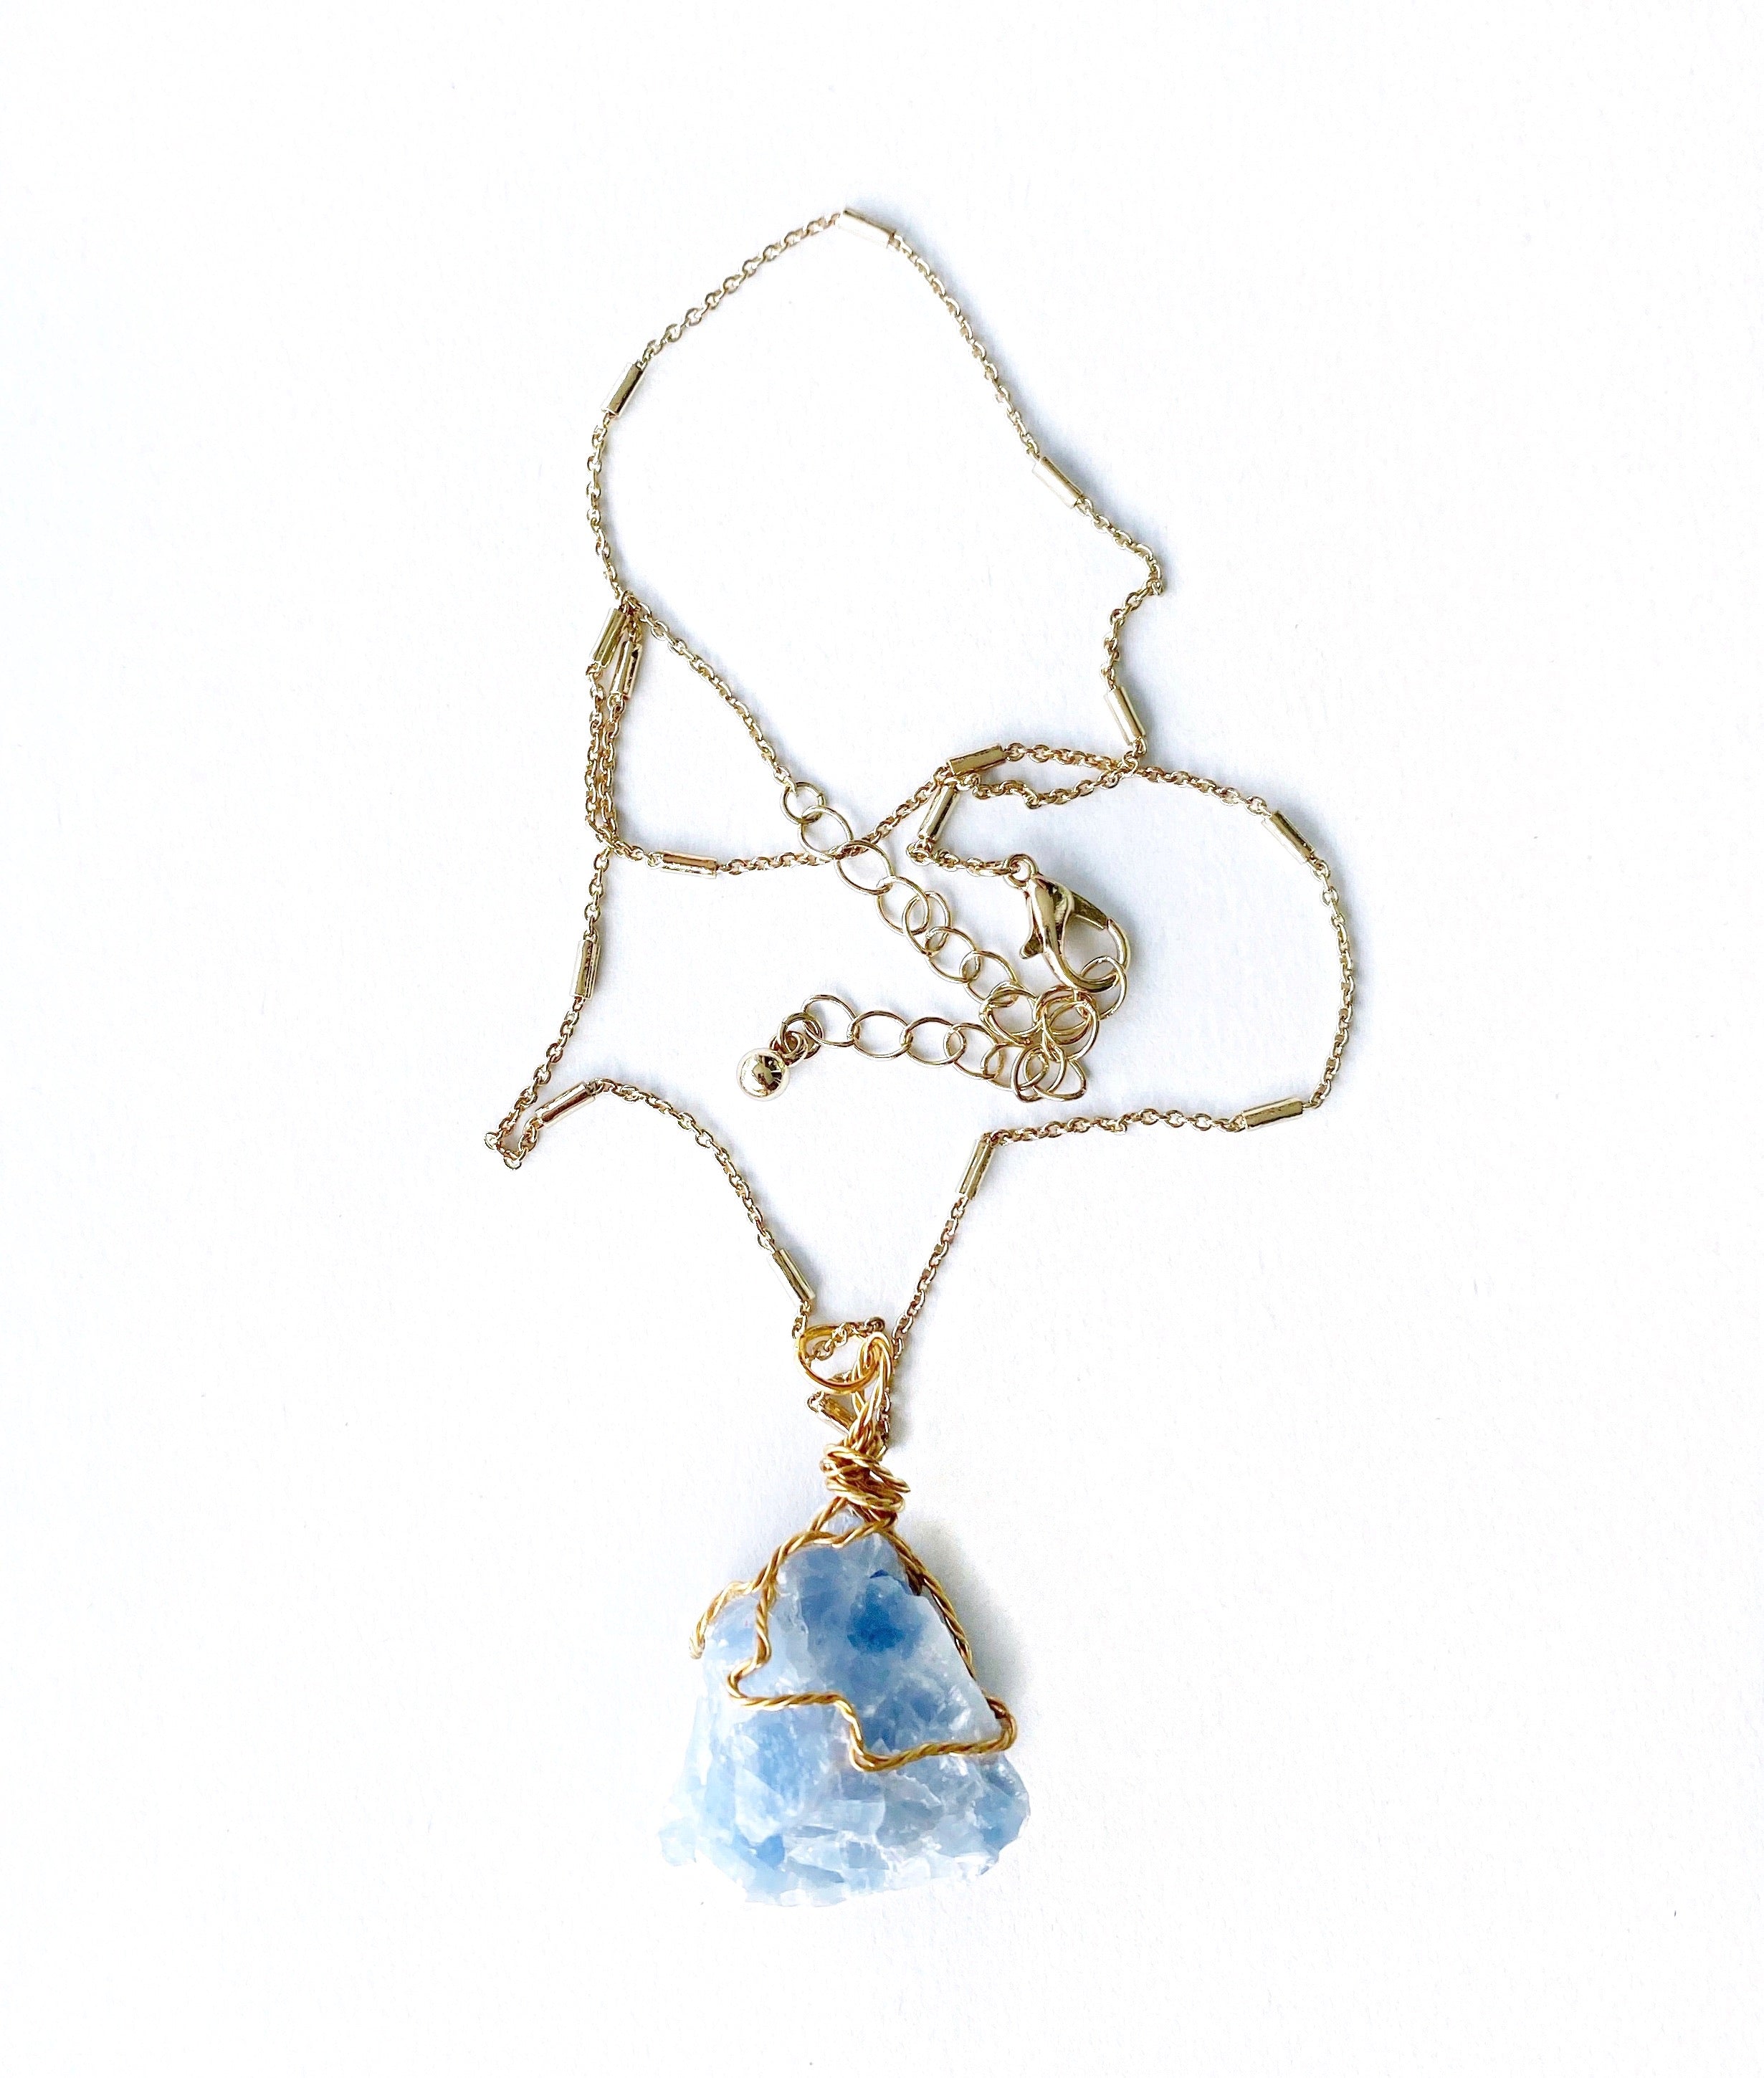 Rough Blue Calcite Gemstone Crystal Gold Necklace